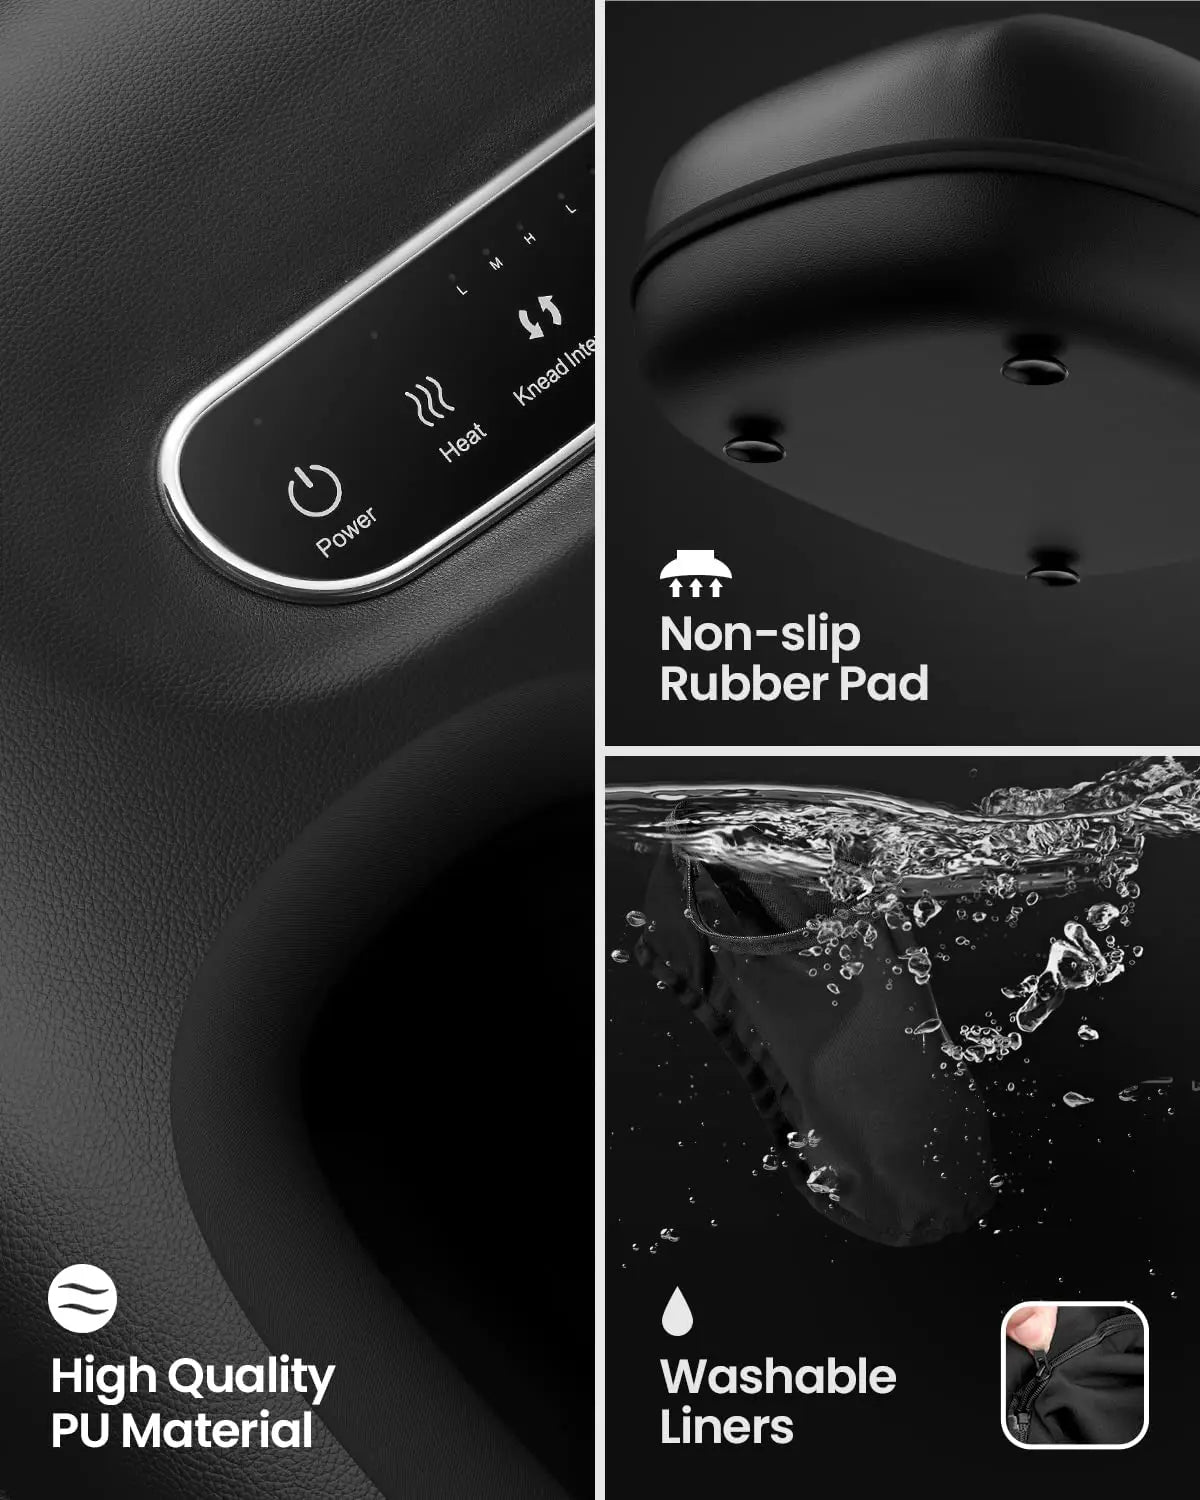 A collage image showcasing features of the Shiatsu Foot Massager Lite by Renpho EU. Top left: a panel with controls labeled "Power," "Heat," "Knead" for a customized massage experience. Top right: a non-slip rubber pad. Bottom left: text, "High Quality PU Material." Bottom right: washable liners submerged in water. The design is minimalistic with a black background.